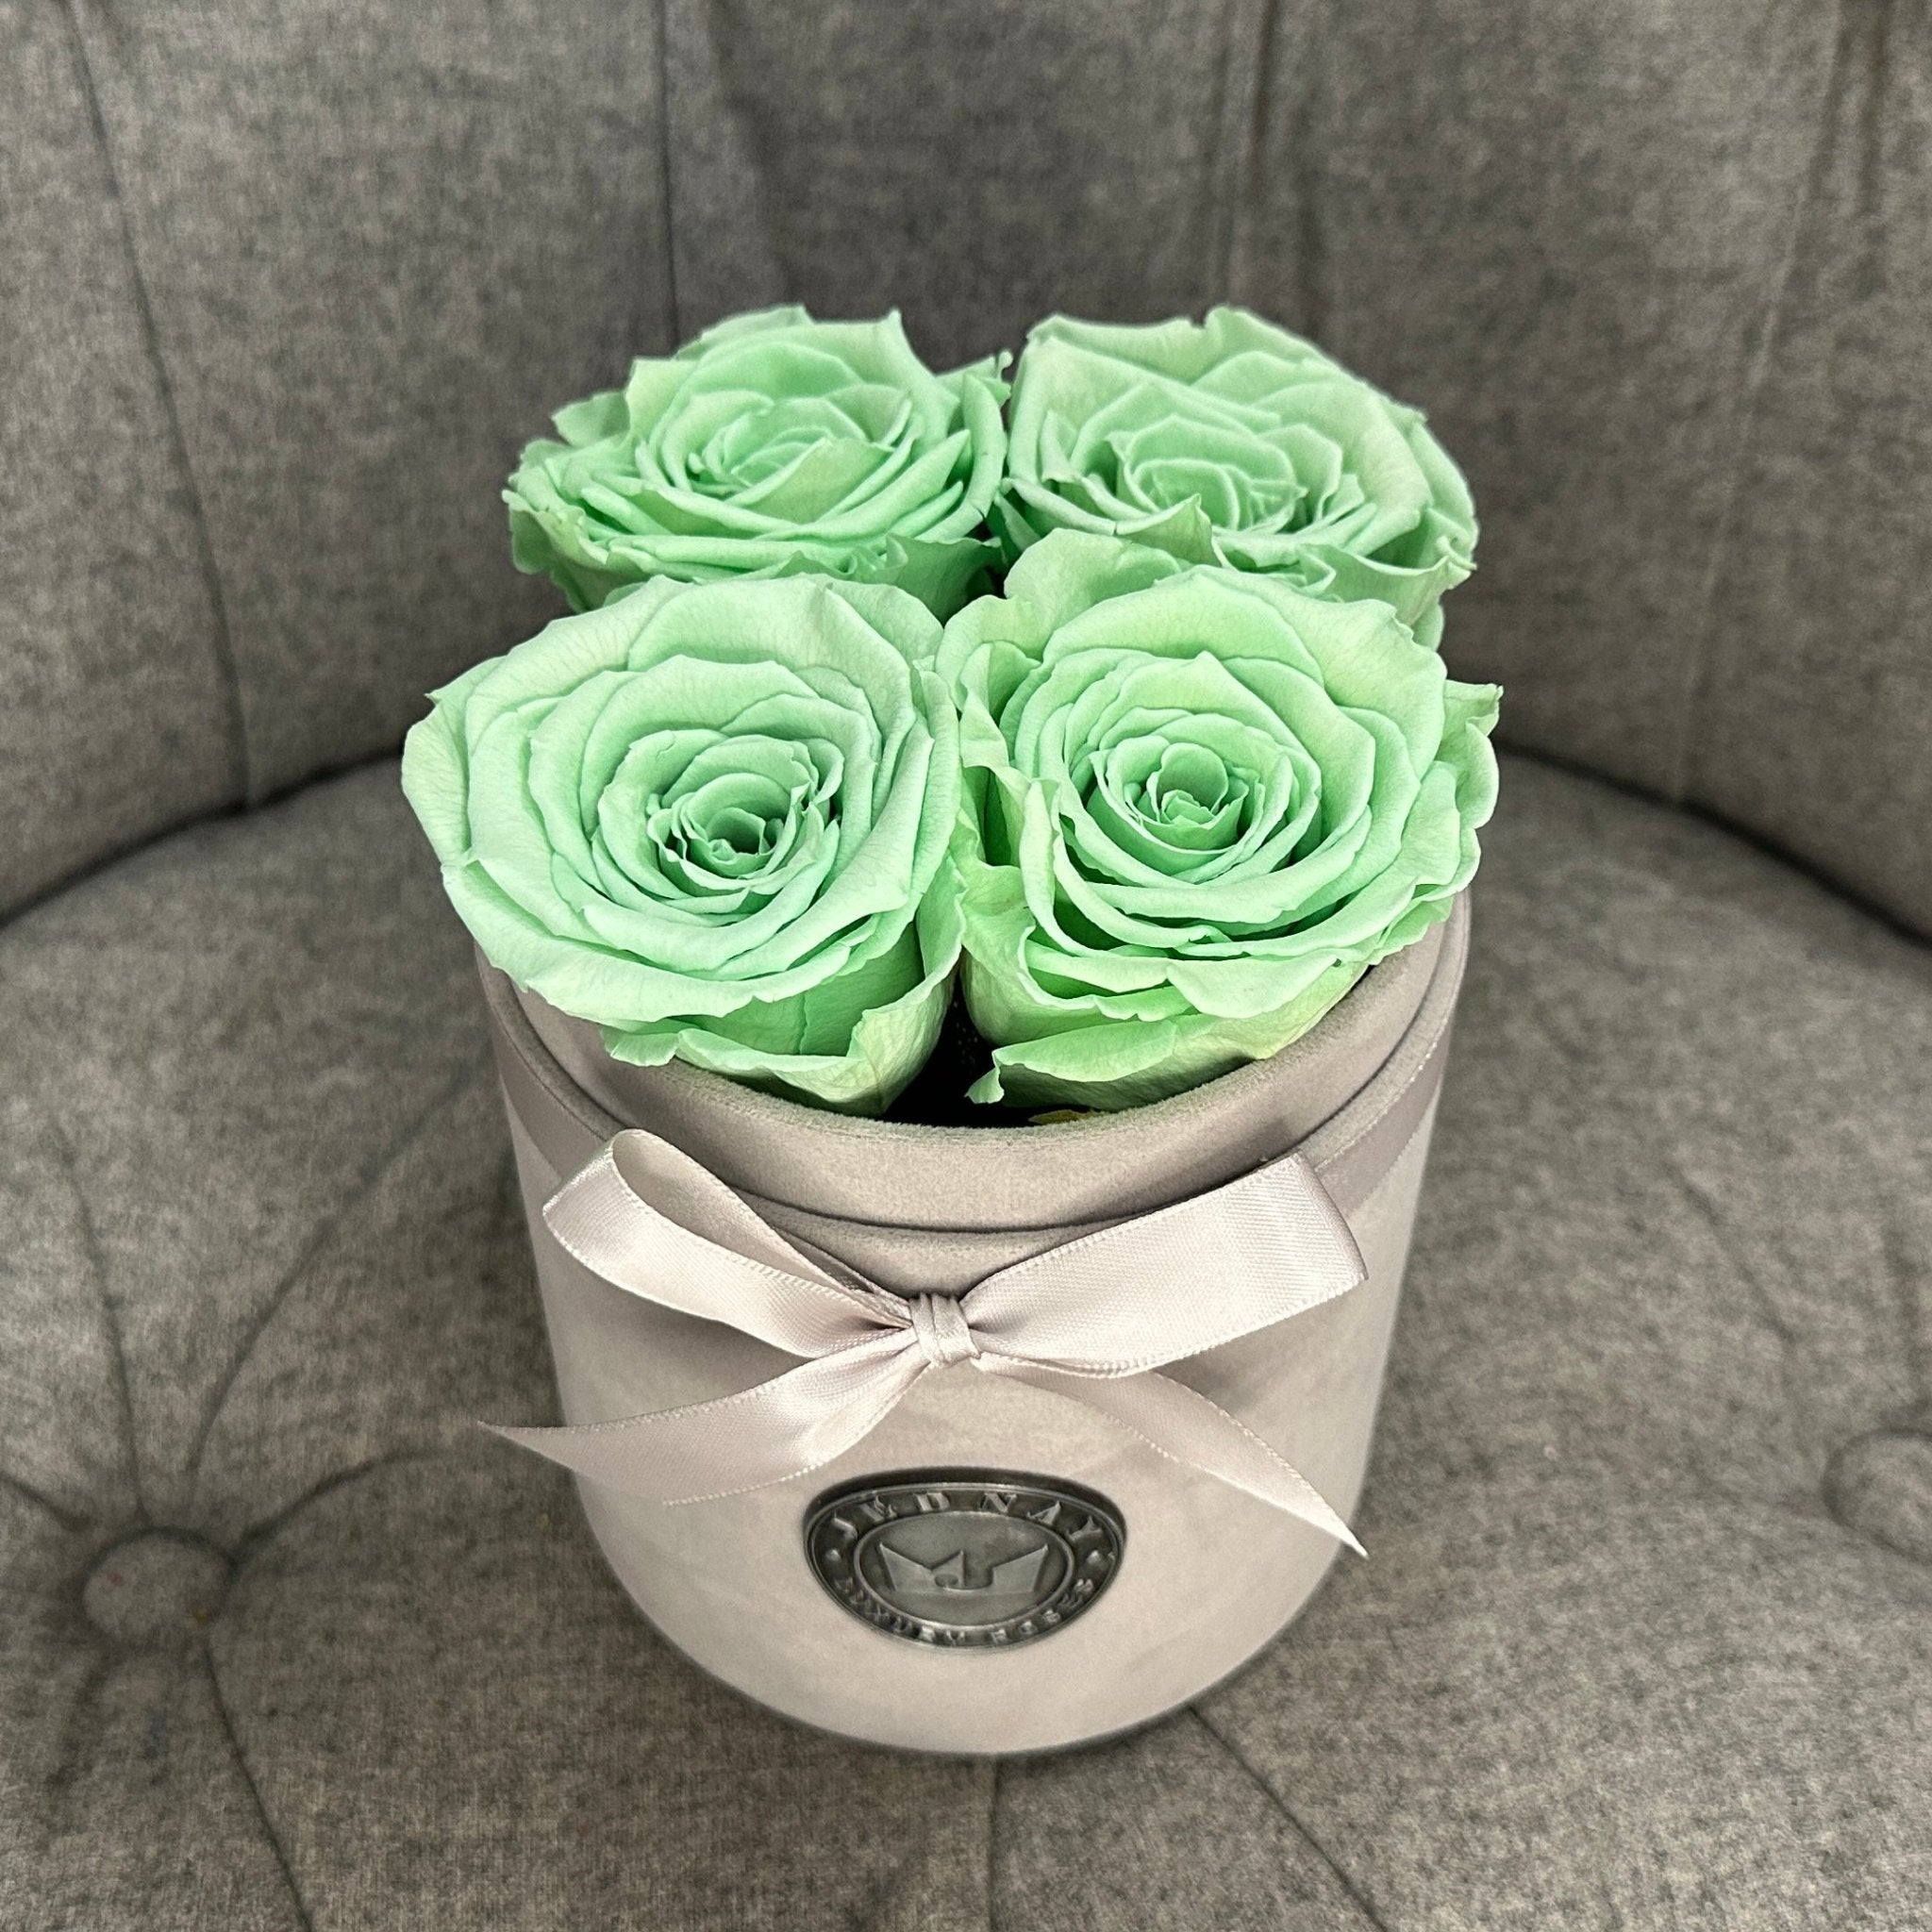 Petite Grey Suede Forever Rose Box - Peppermint Tea Eternal Roses - Jednay Roses